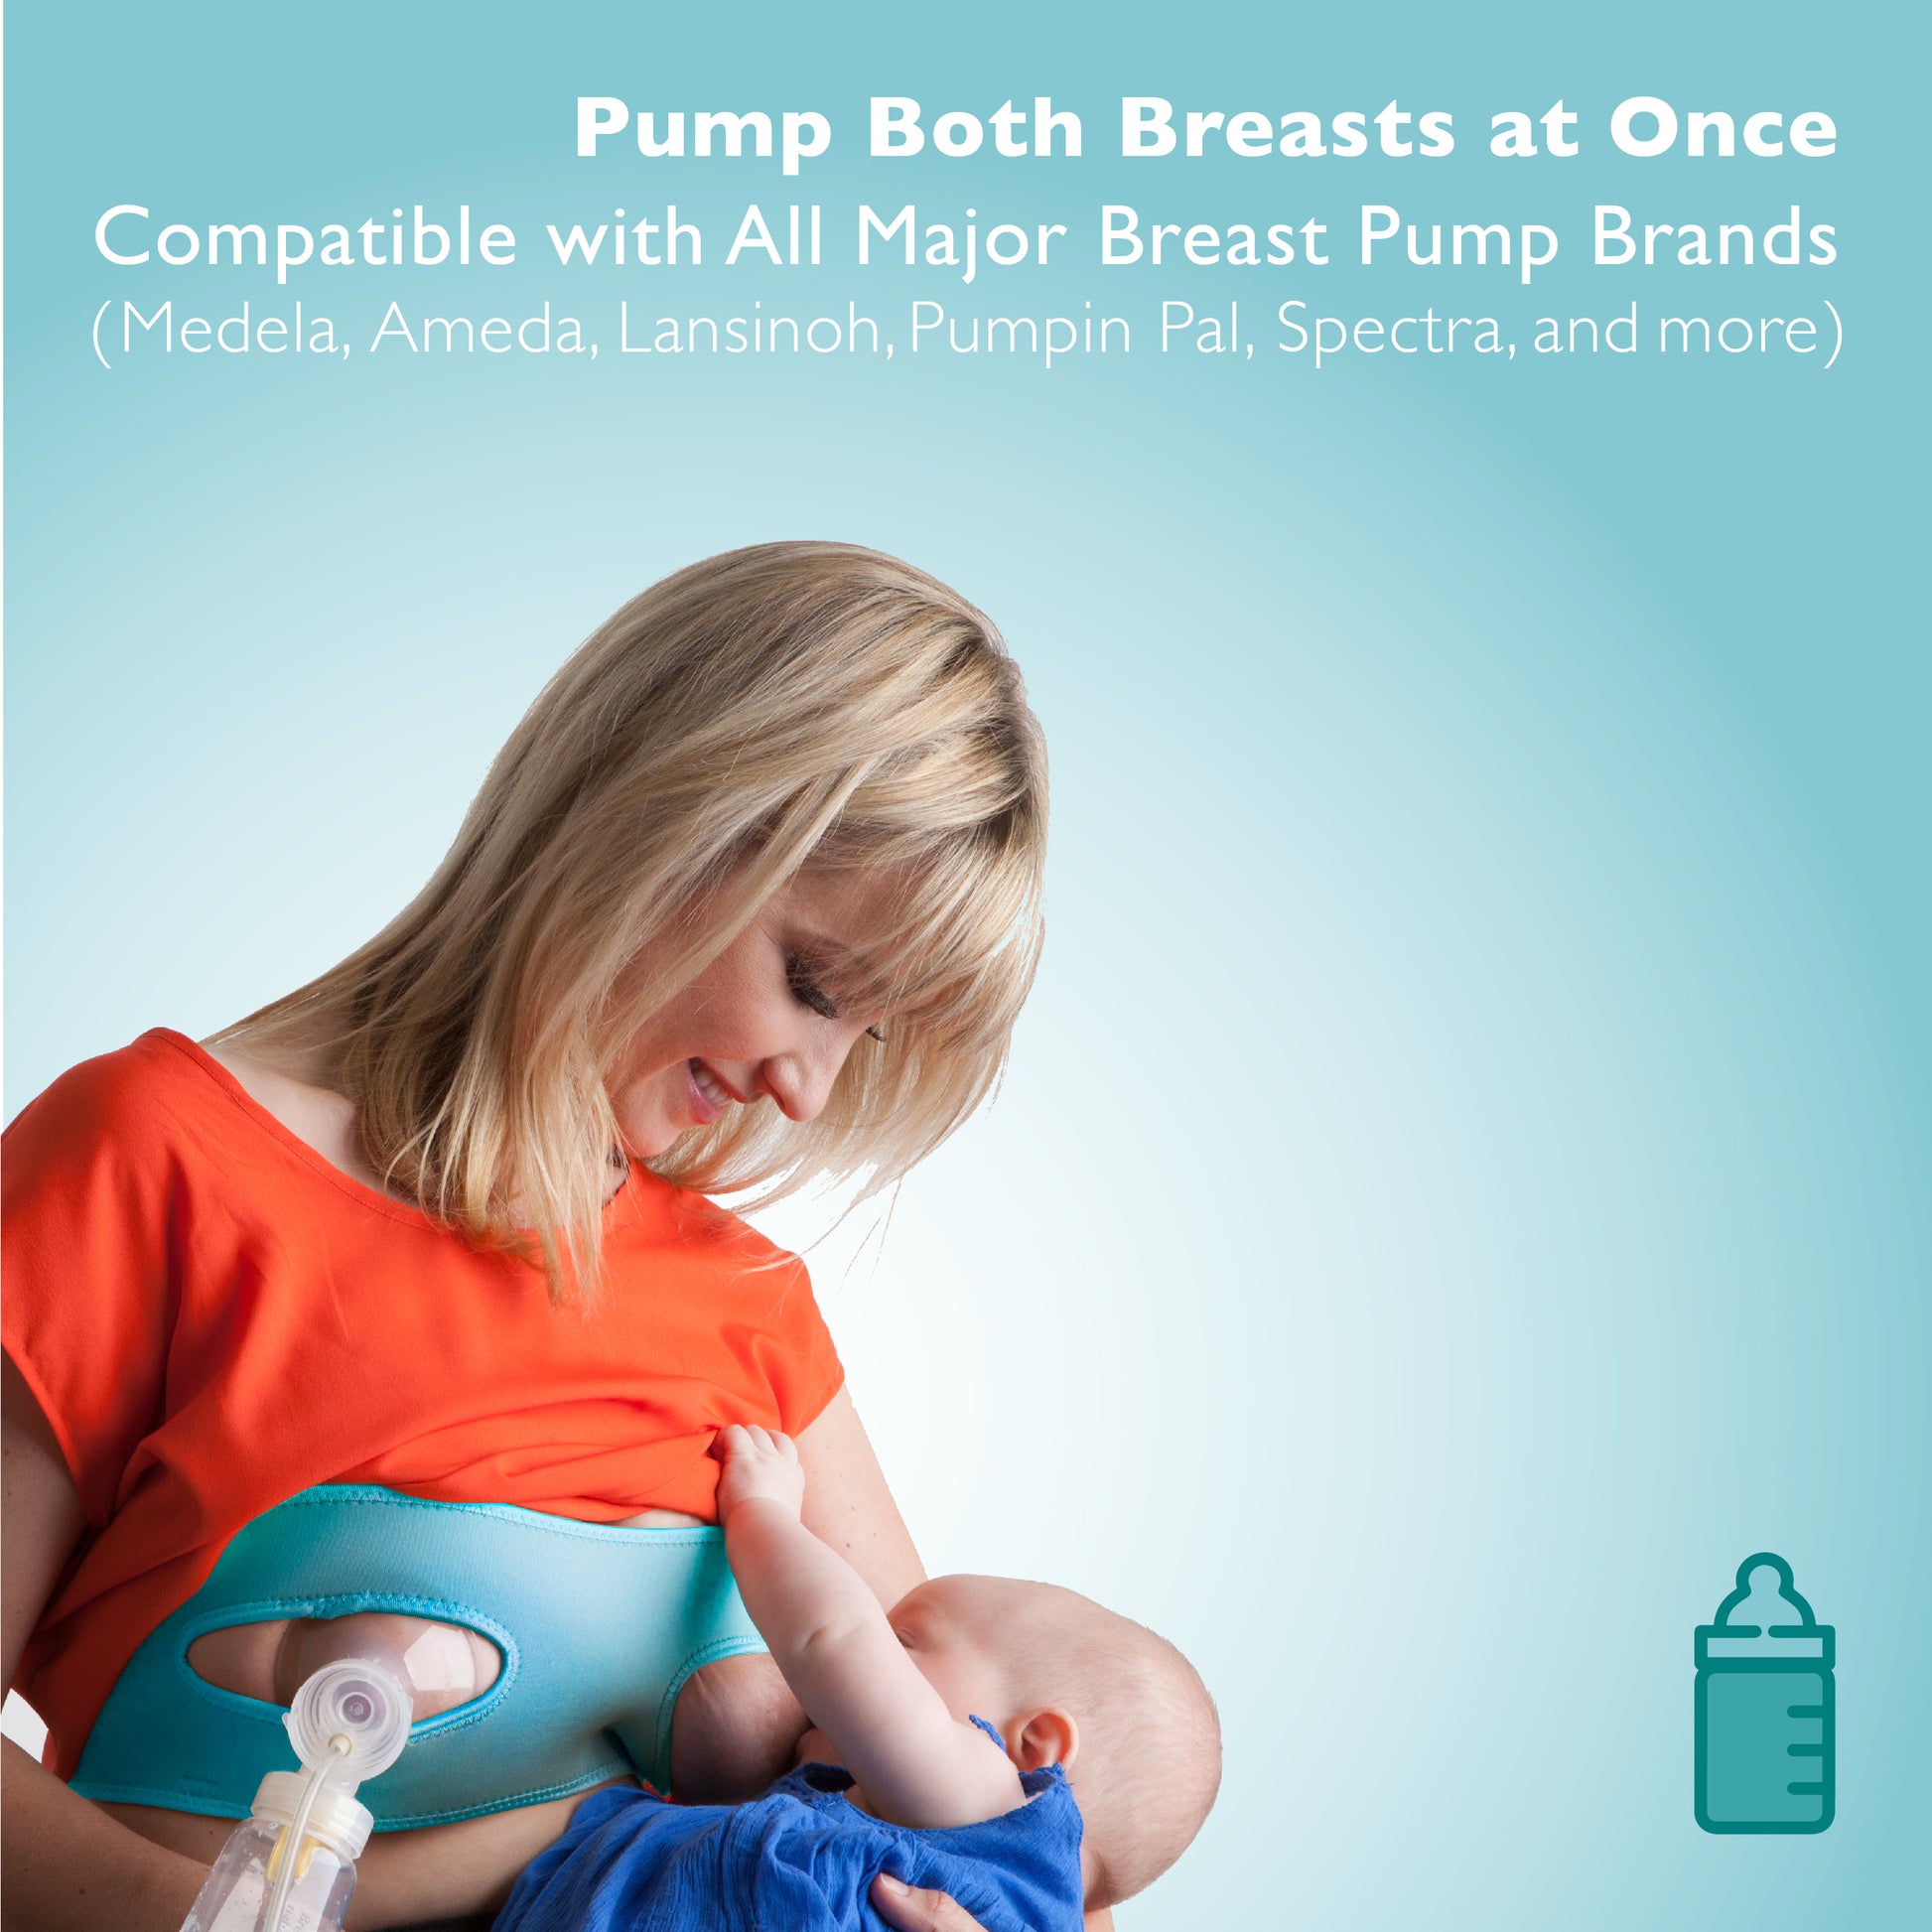 Pump Strap Hands-Free Pumping Bra - Simple, Quick On & Off Design